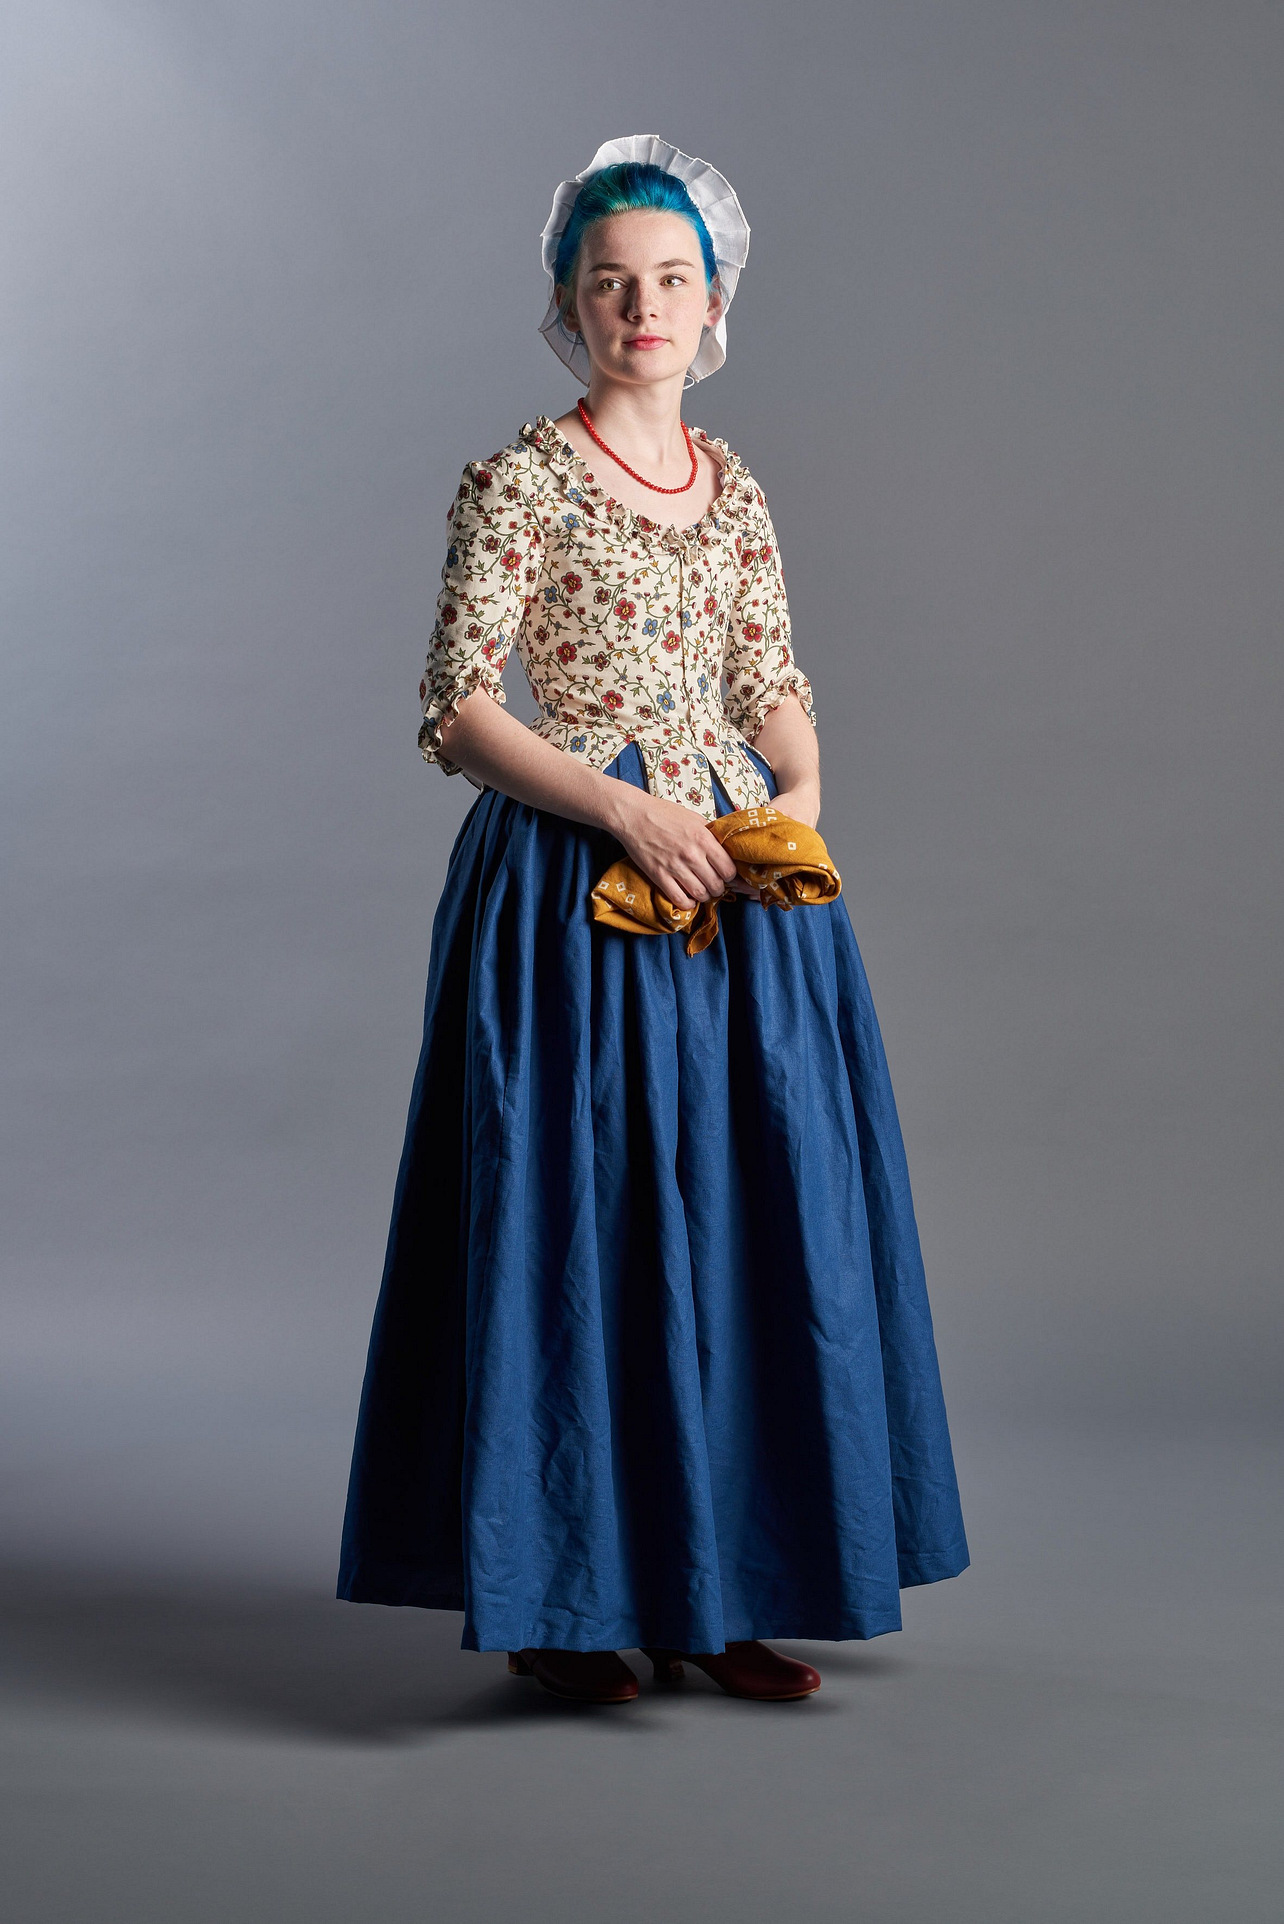 1770s Cotton Jacket and Petticoat